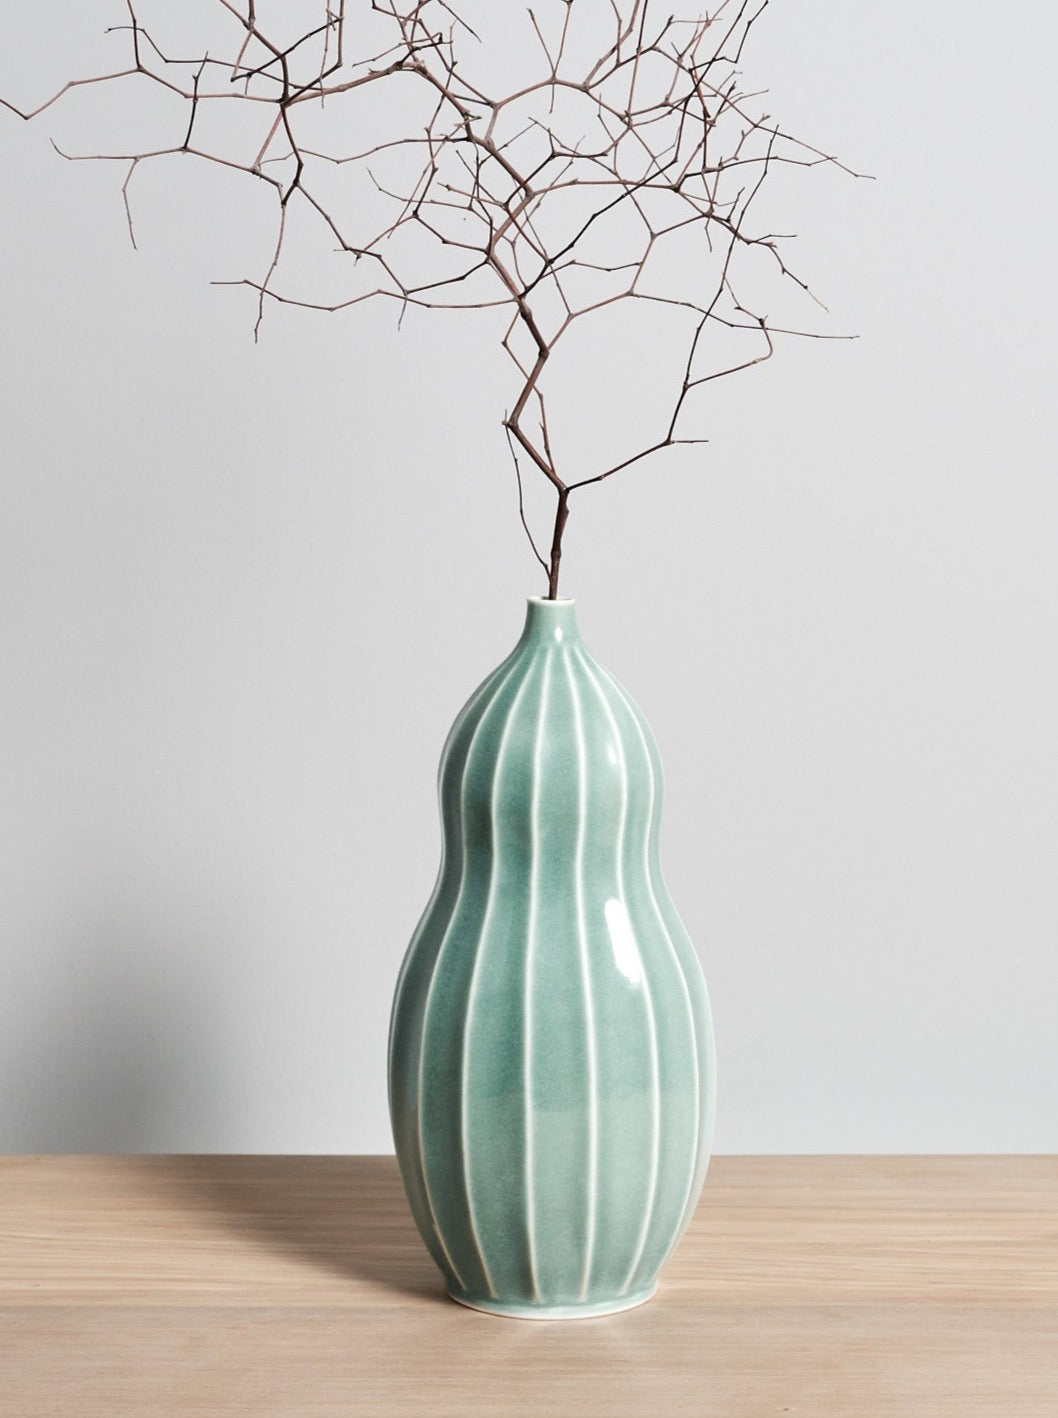 A Gourd Vase - Celadon by Jino Ceramic Studio with a twig in it.